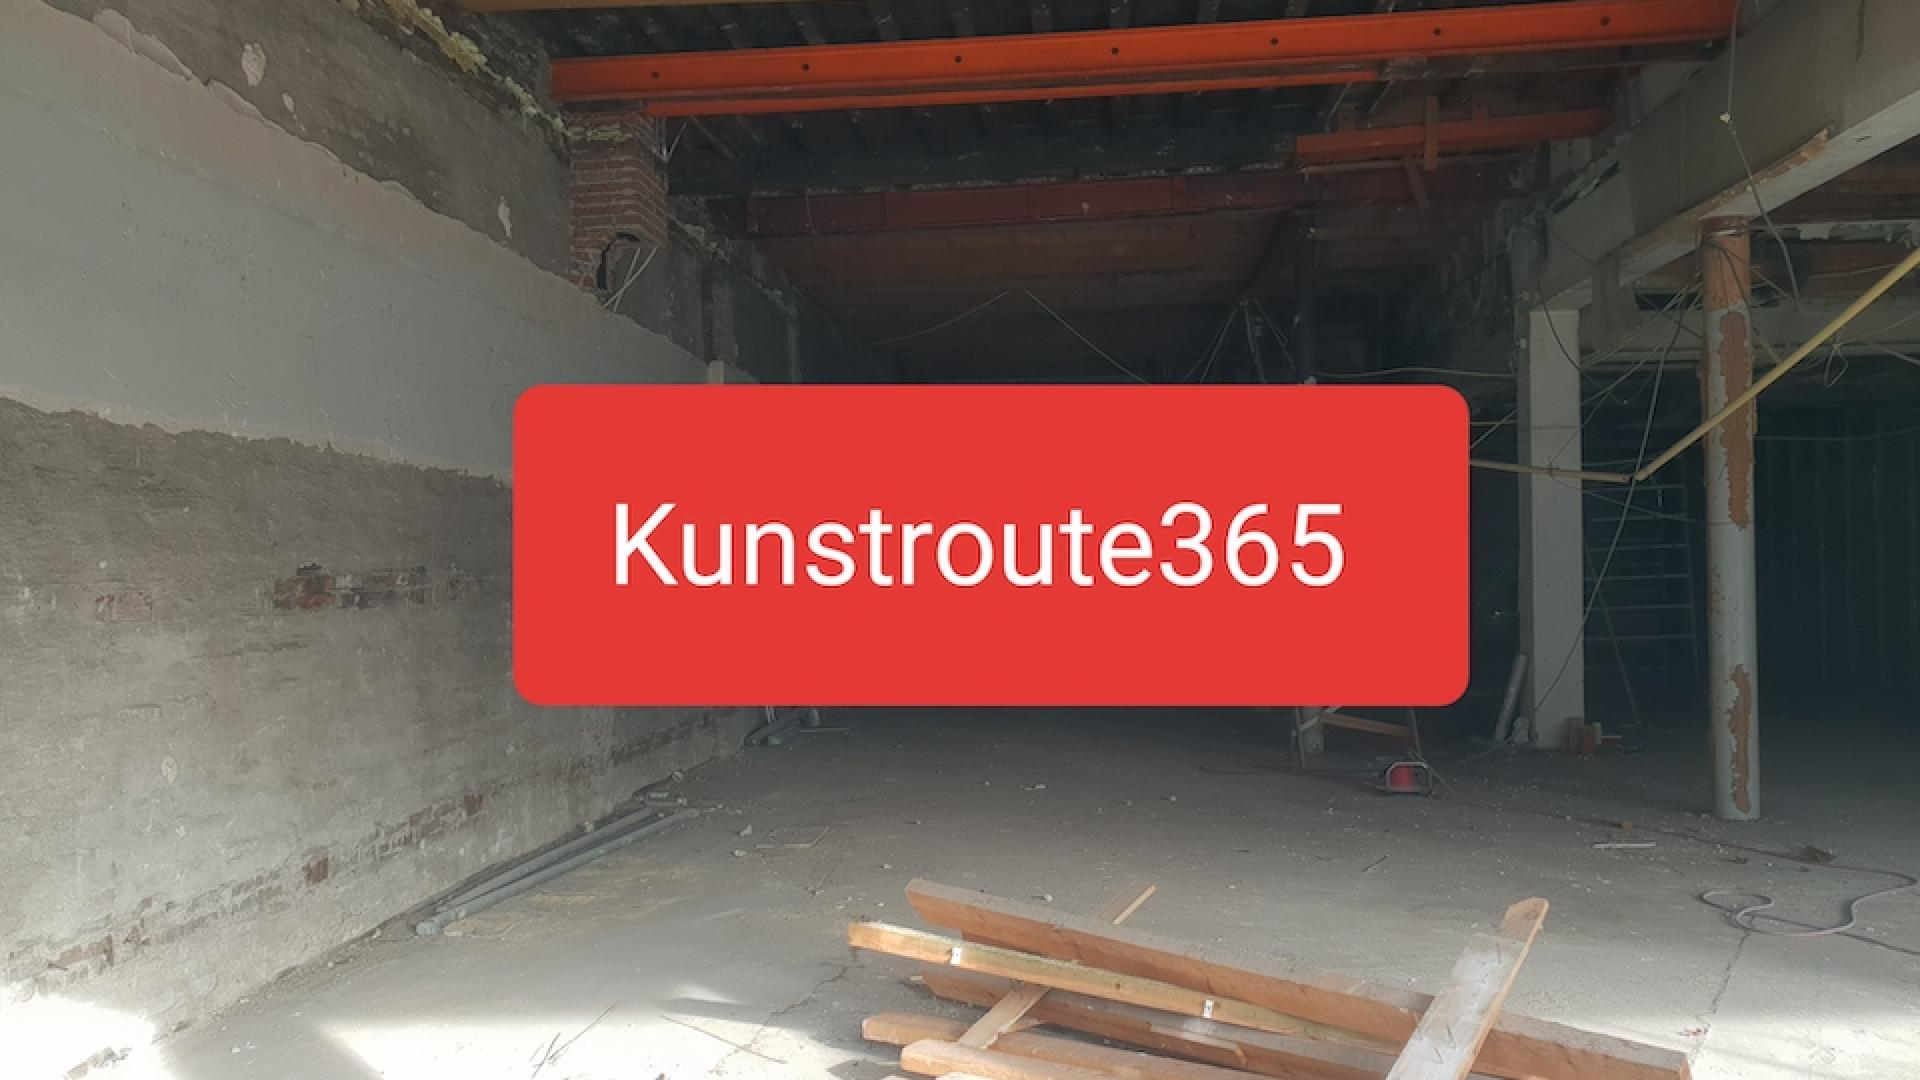 Kunstroute365